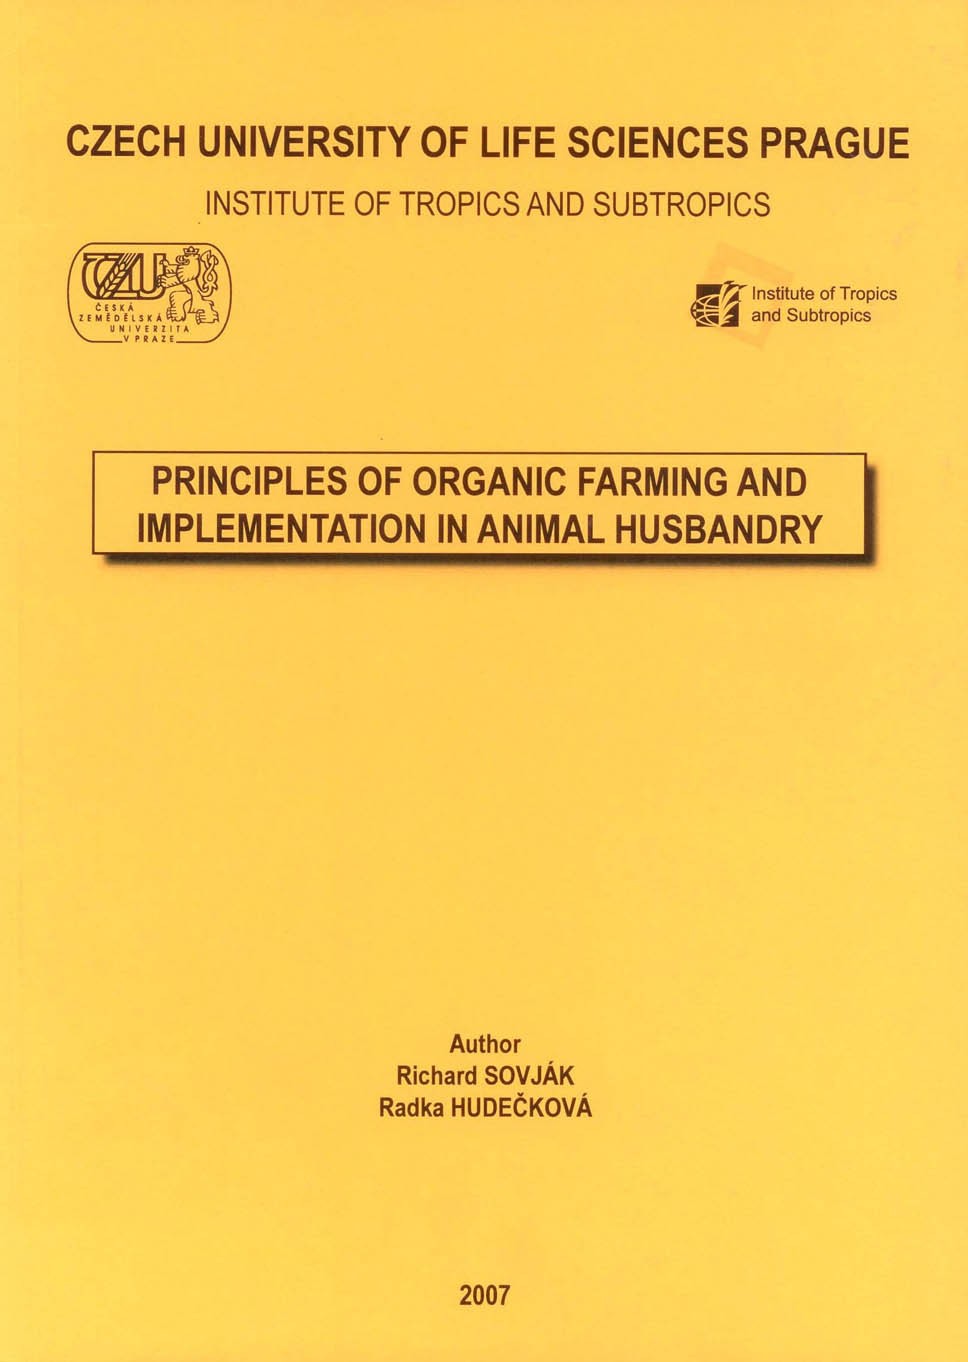 Principles of Organic Farming and Implementation in Animal Husbandry